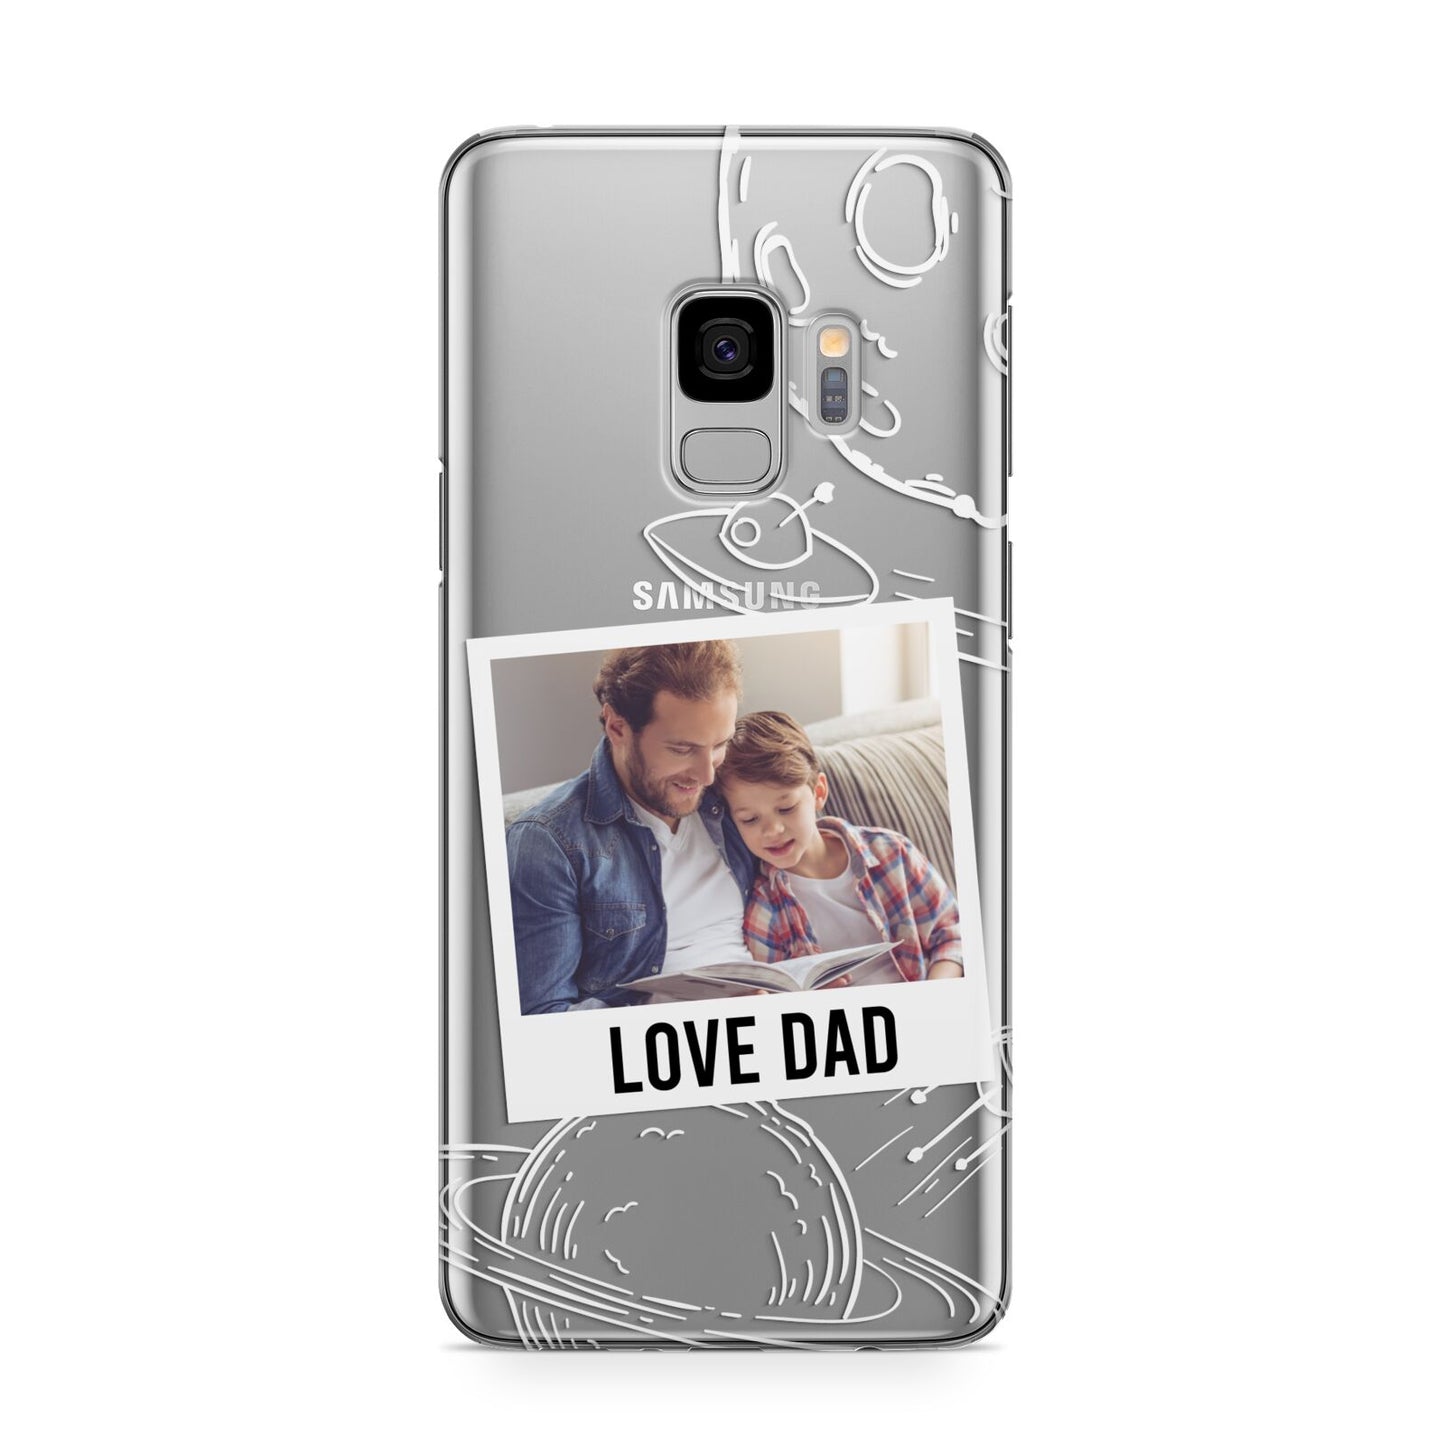 Personalised From Dad Photo Samsung Galaxy S9 Case